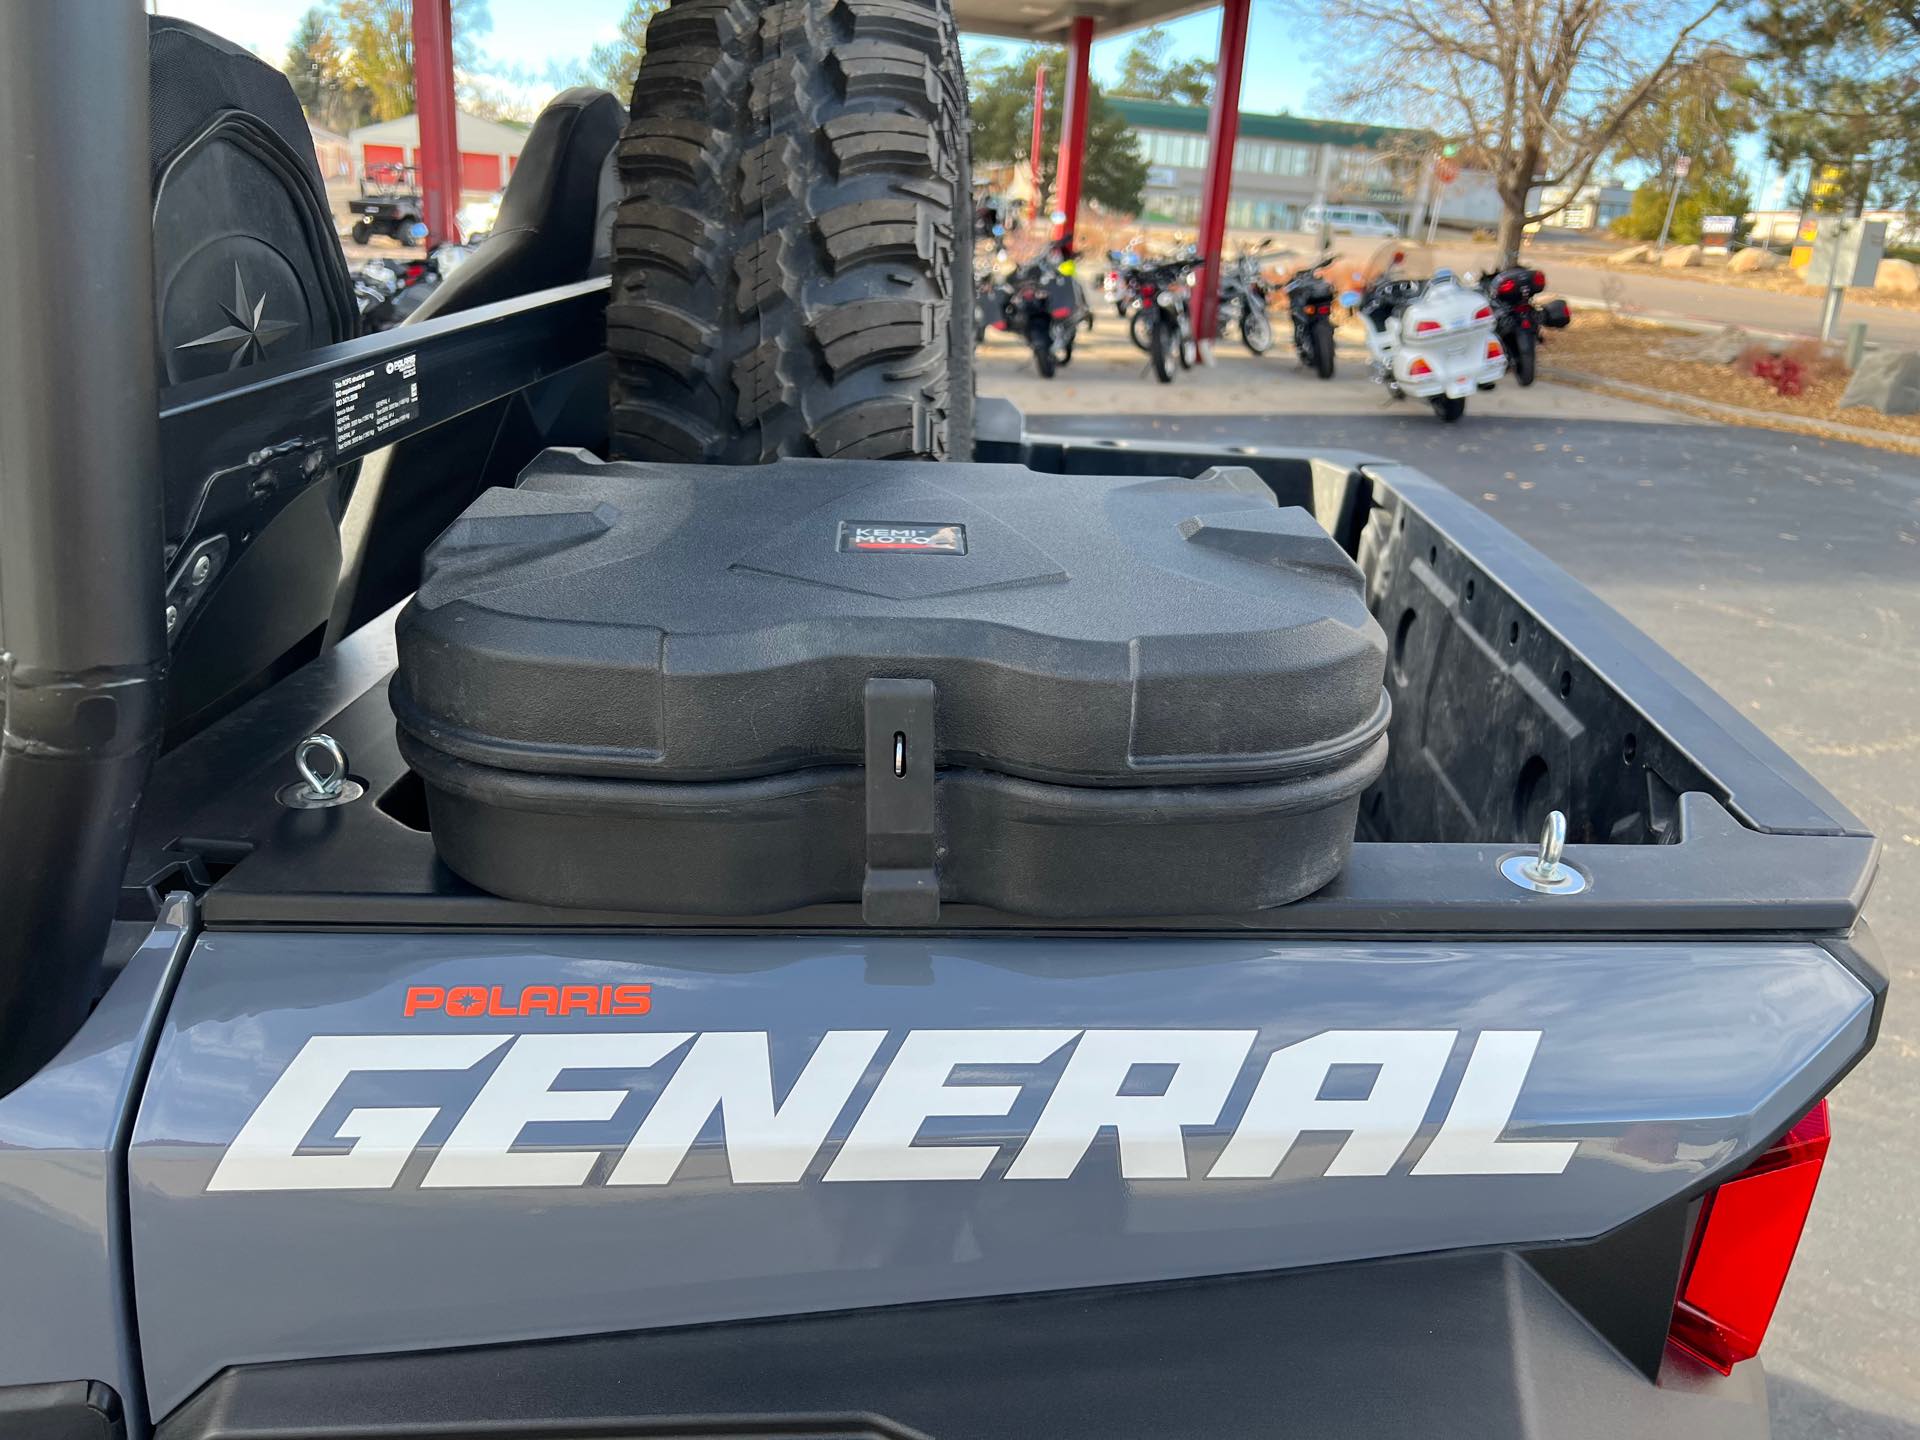 2020 Polaris GENERAL XP 1000 Deluxe at Aces Motorcycles - Fort Collins